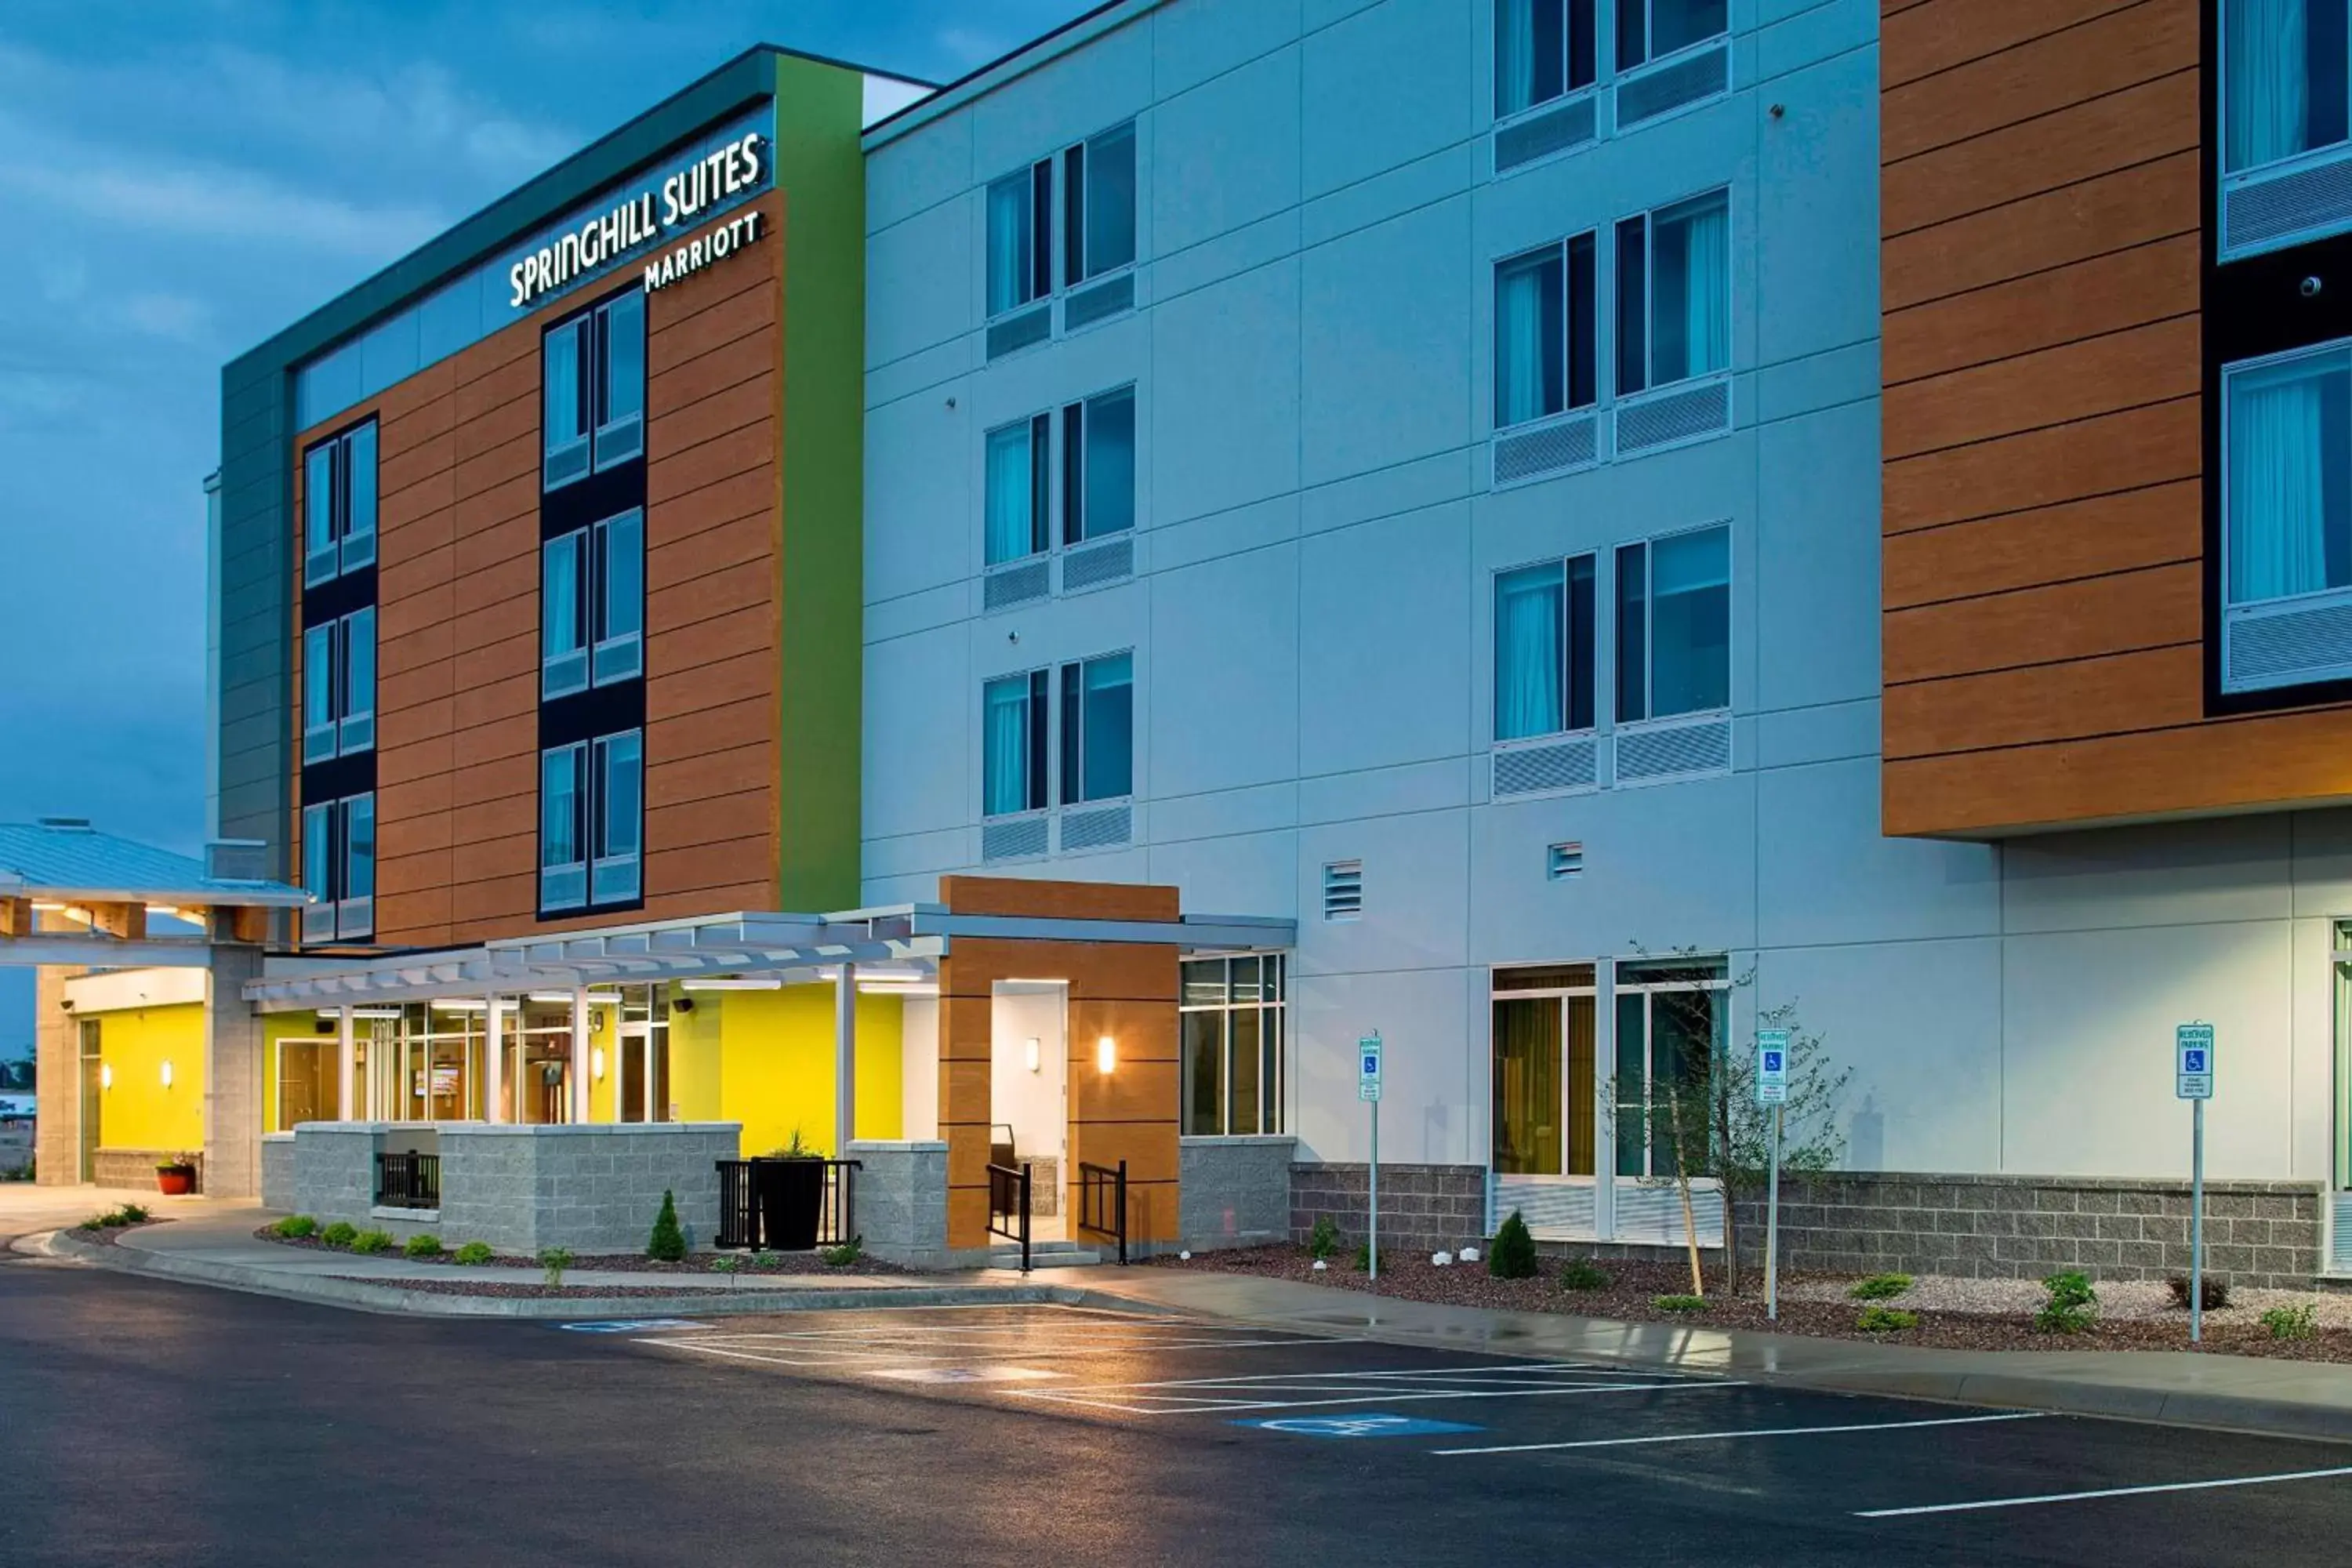 Property Building in SpringHill Suites by Marriott Kalispell